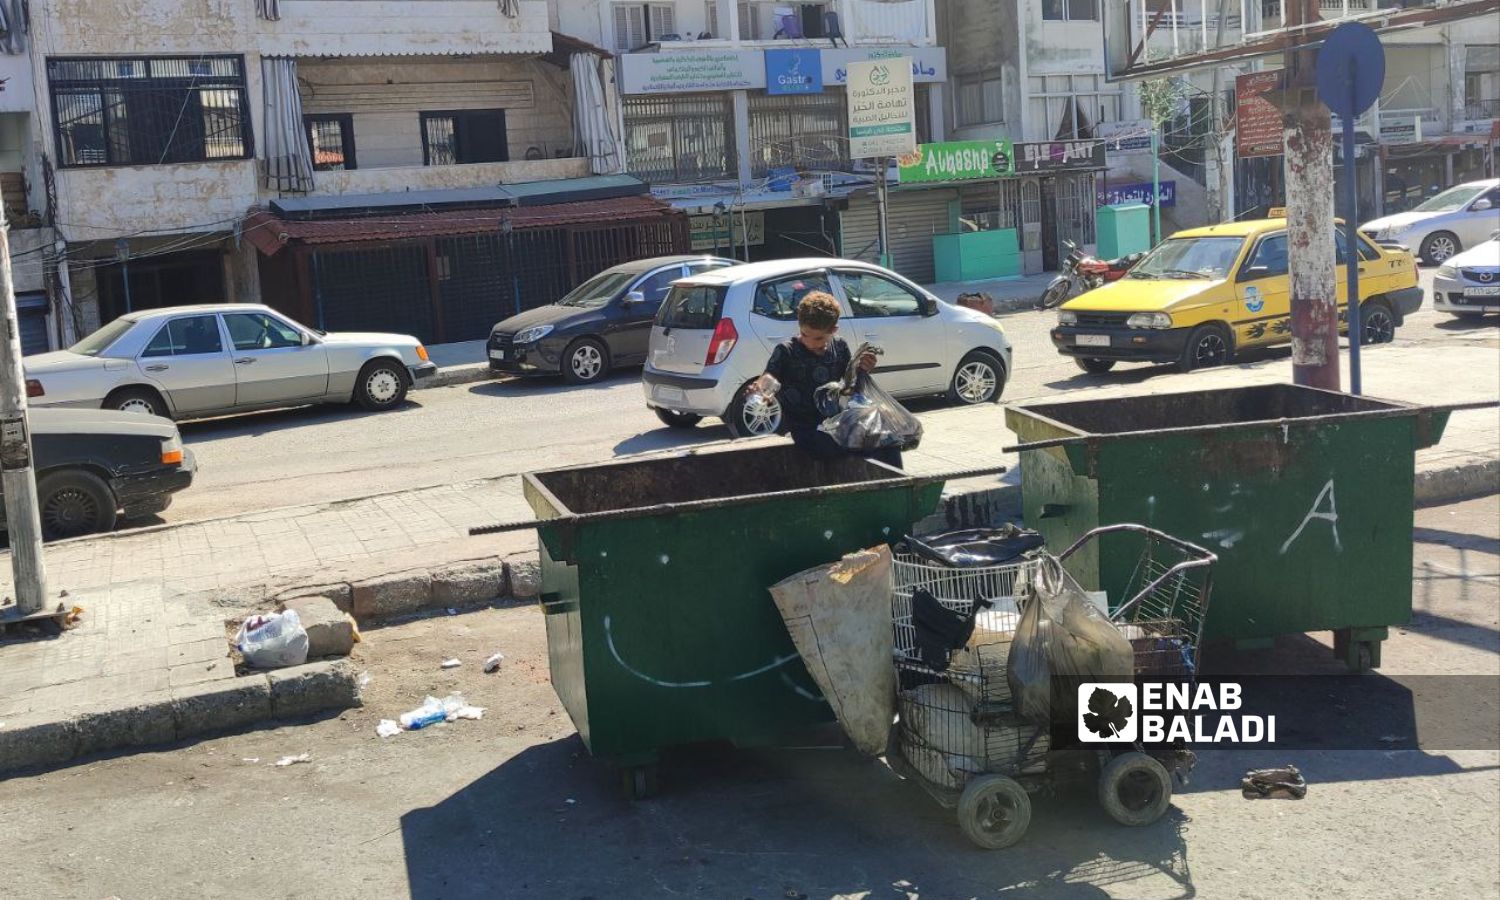 A child makes a living by selling garbage waste near the Sbiro parking lot in the coastal Latakia city - September 2023 (Enab Baladi/Linda Ali)